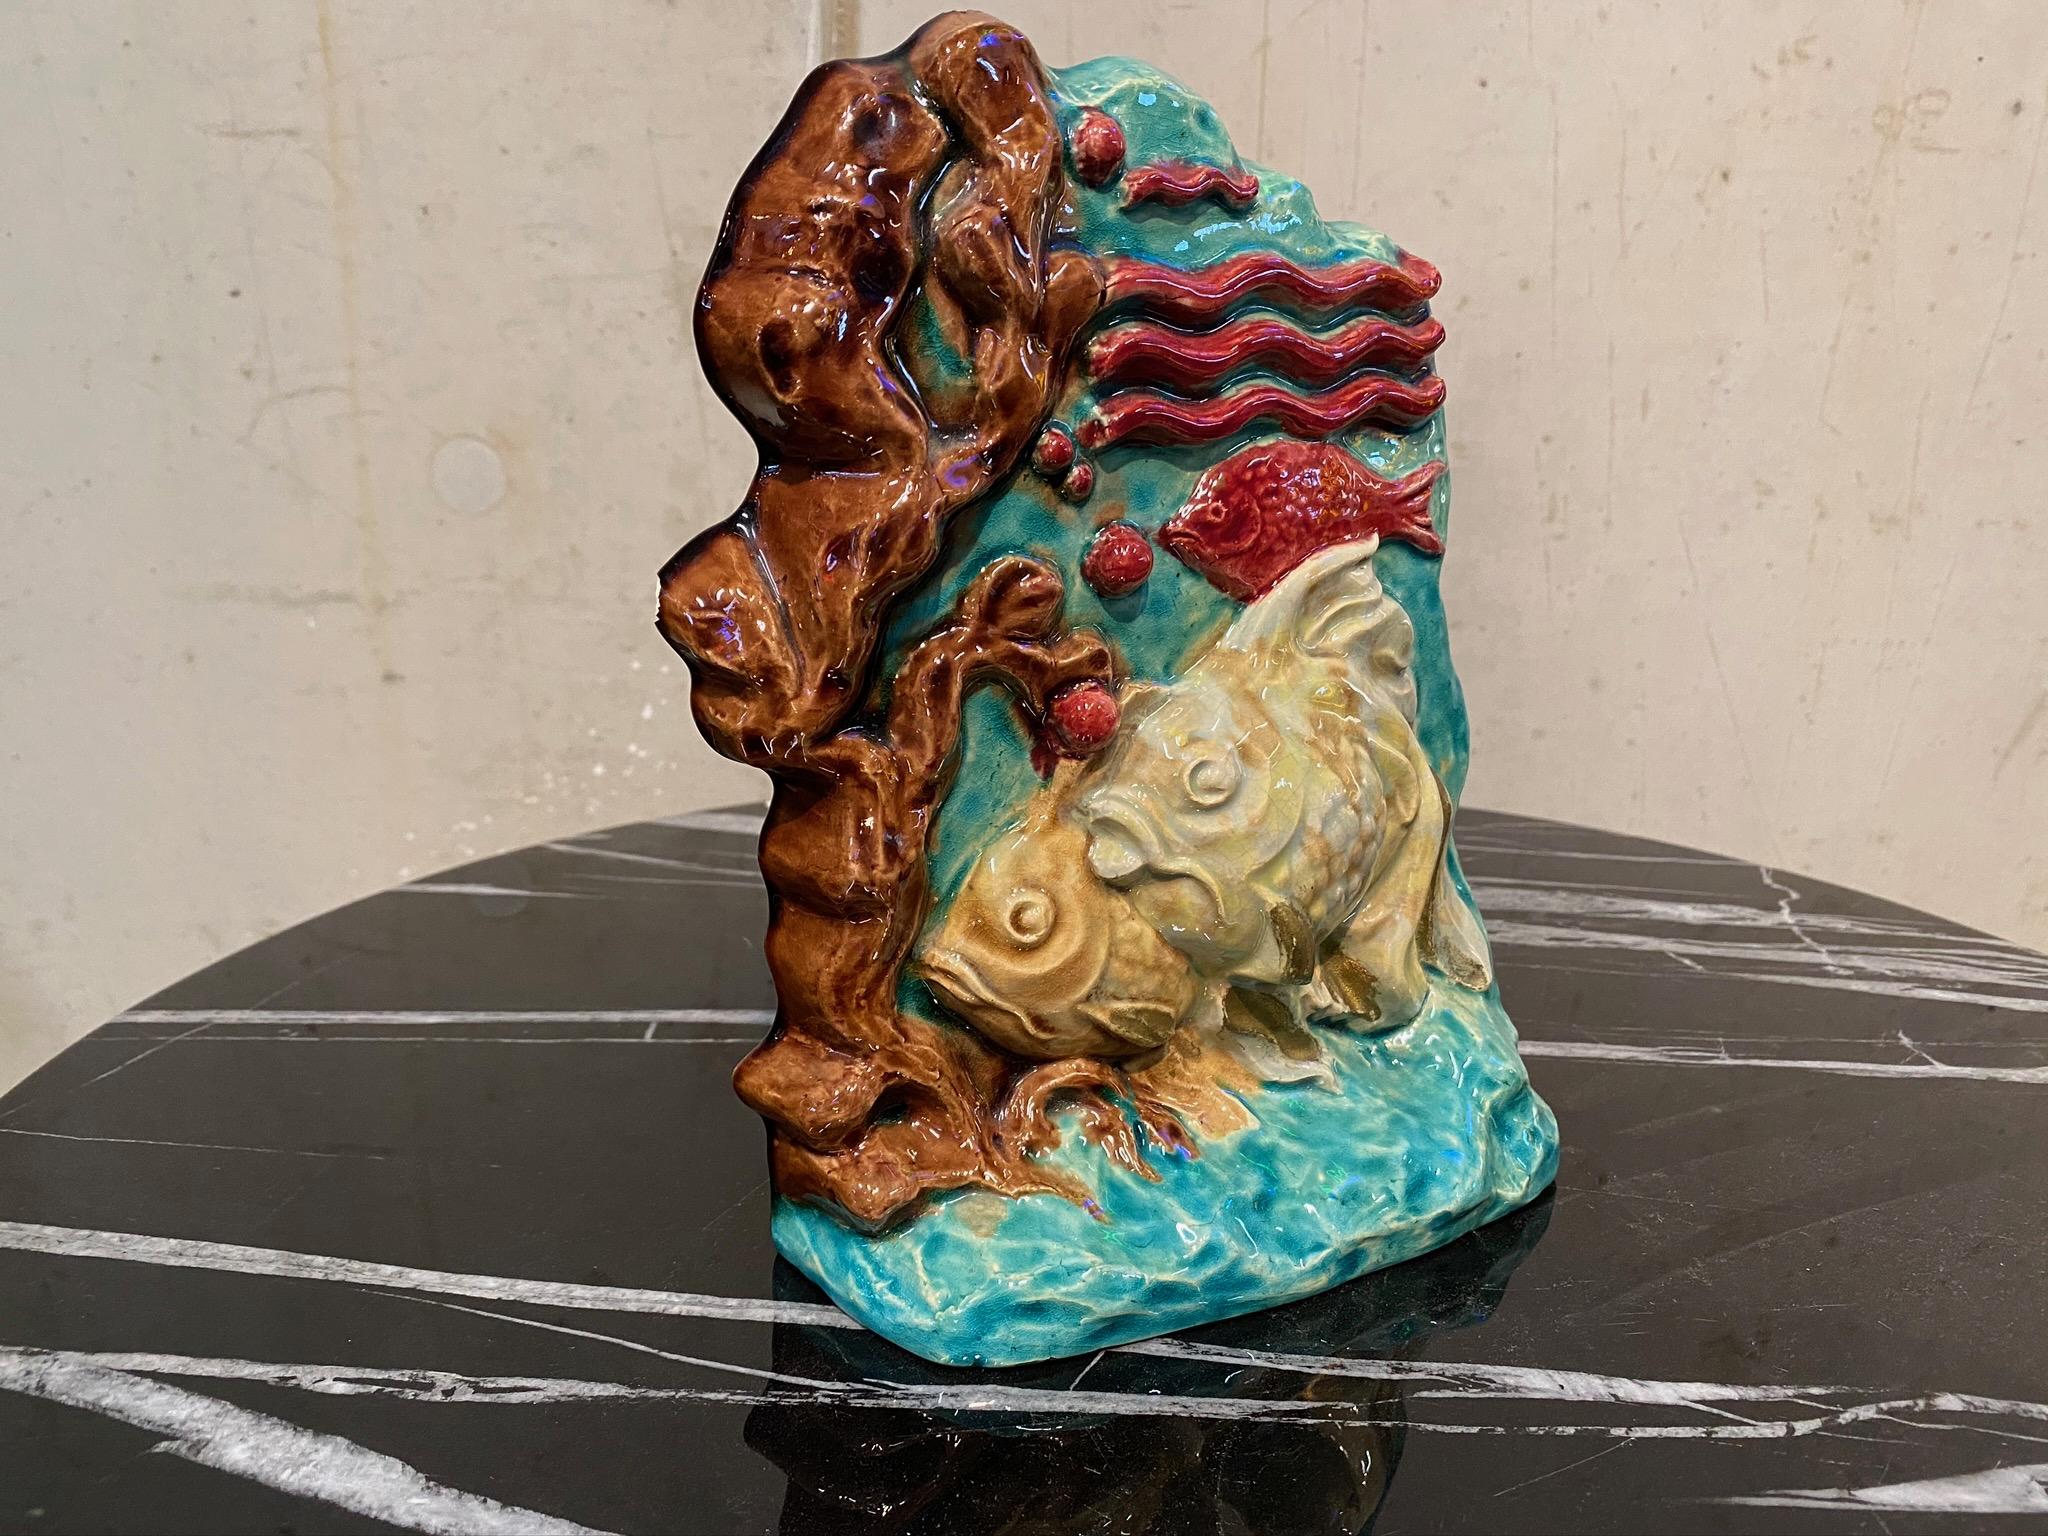 Unique handmade ceramic sculpture from Paris, France. The pictured fish and underwater landscape is elaborated in great detail. On the right edge a small piece of the edge is slightly off-centered.